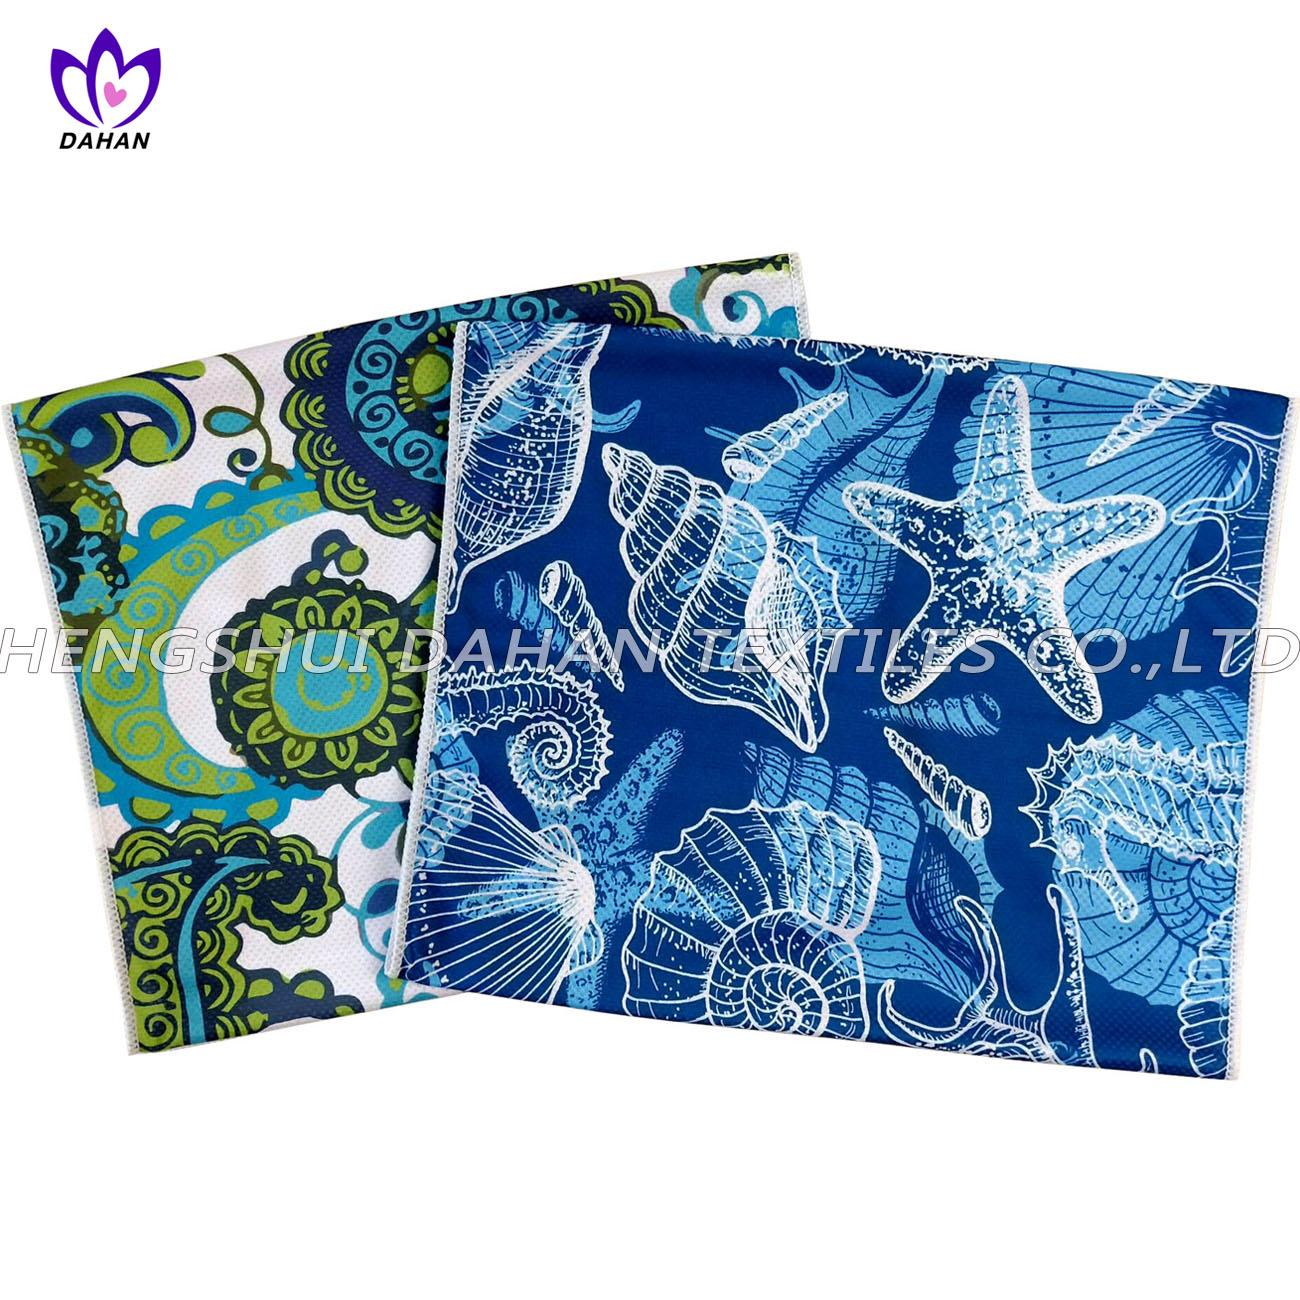 Microfiber cooling towel with printing.